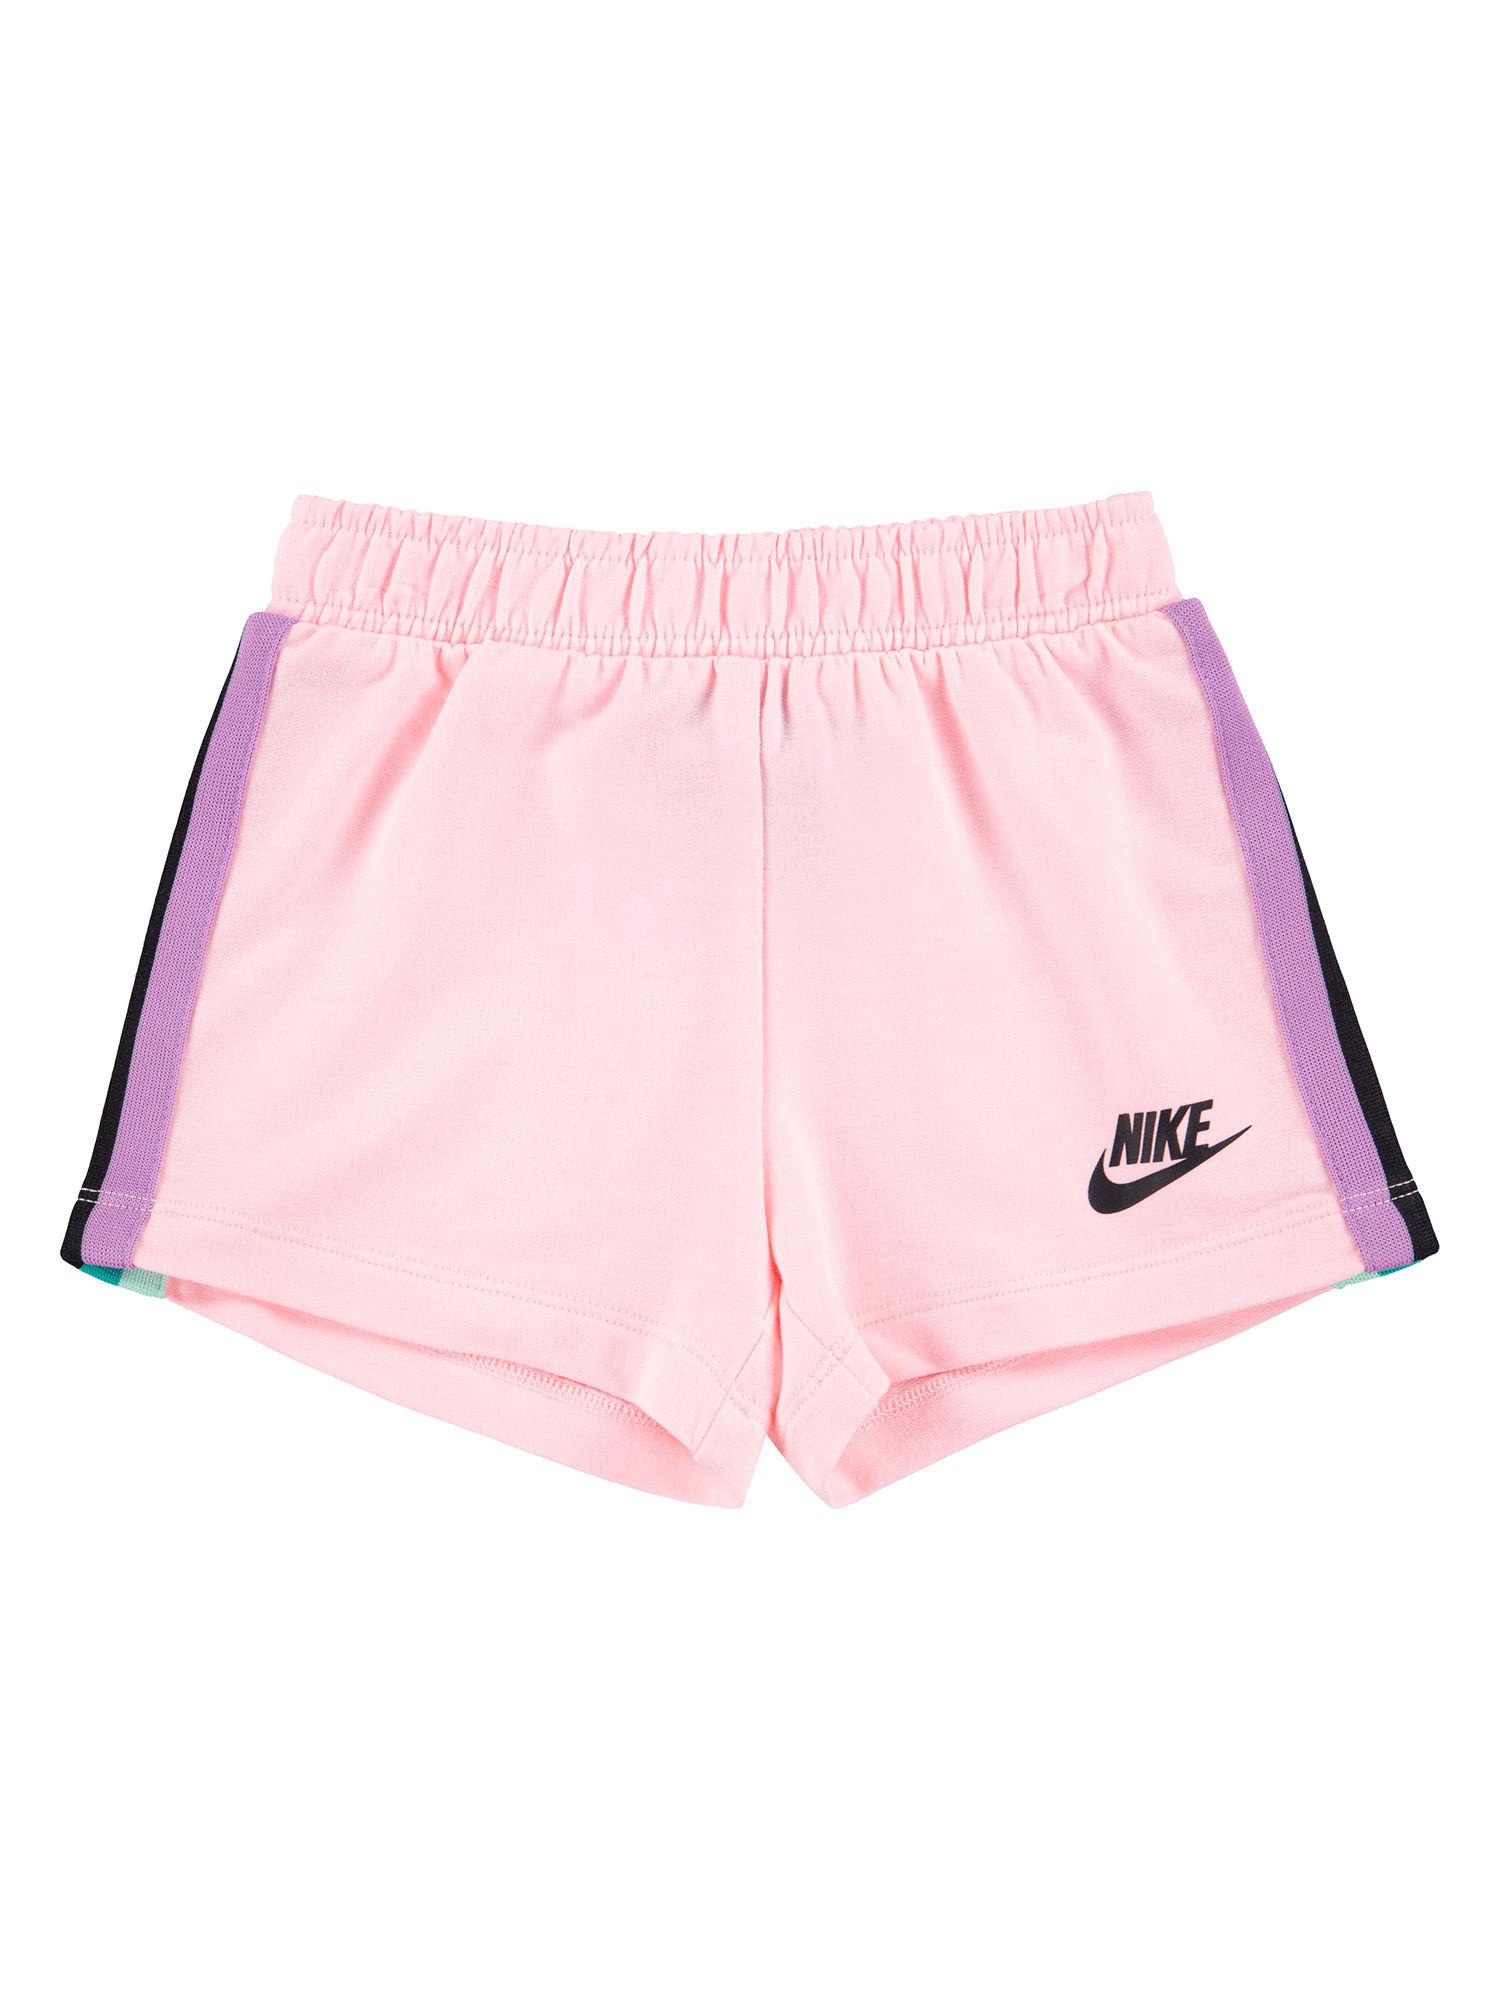 Girls Pink Solid Shorts